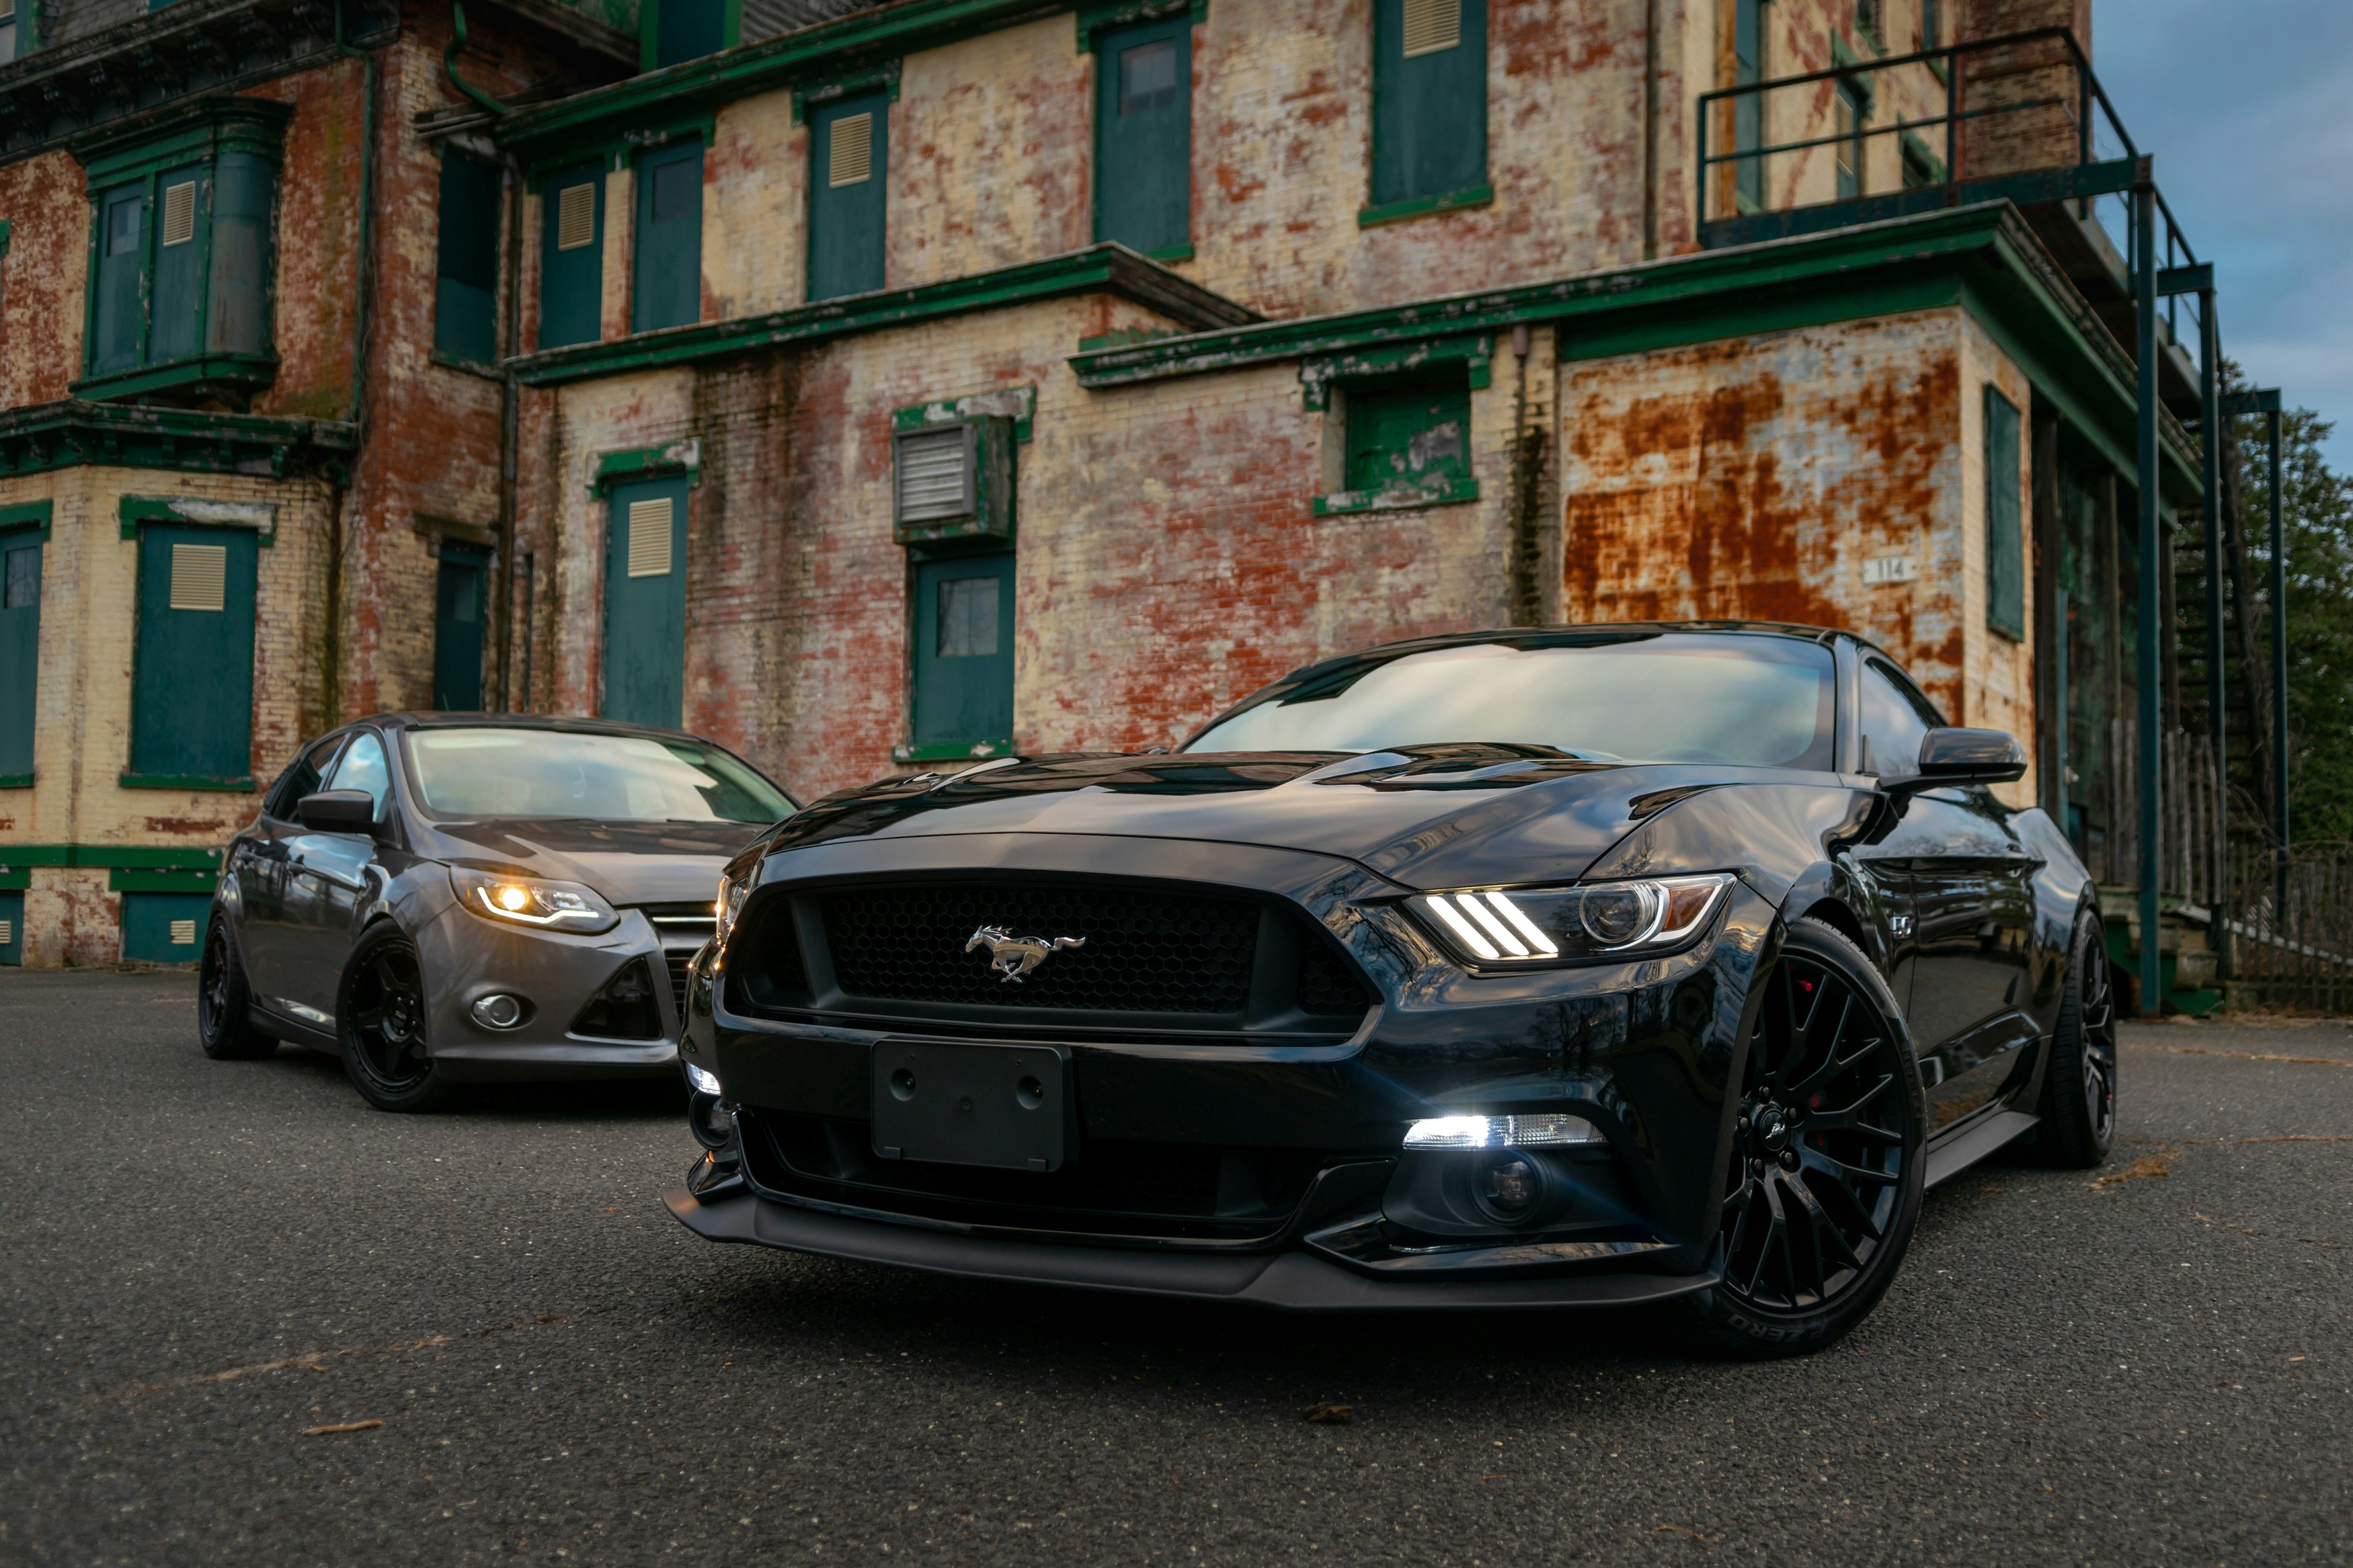 Mustang Images Horse Wallpaper 3500x2333